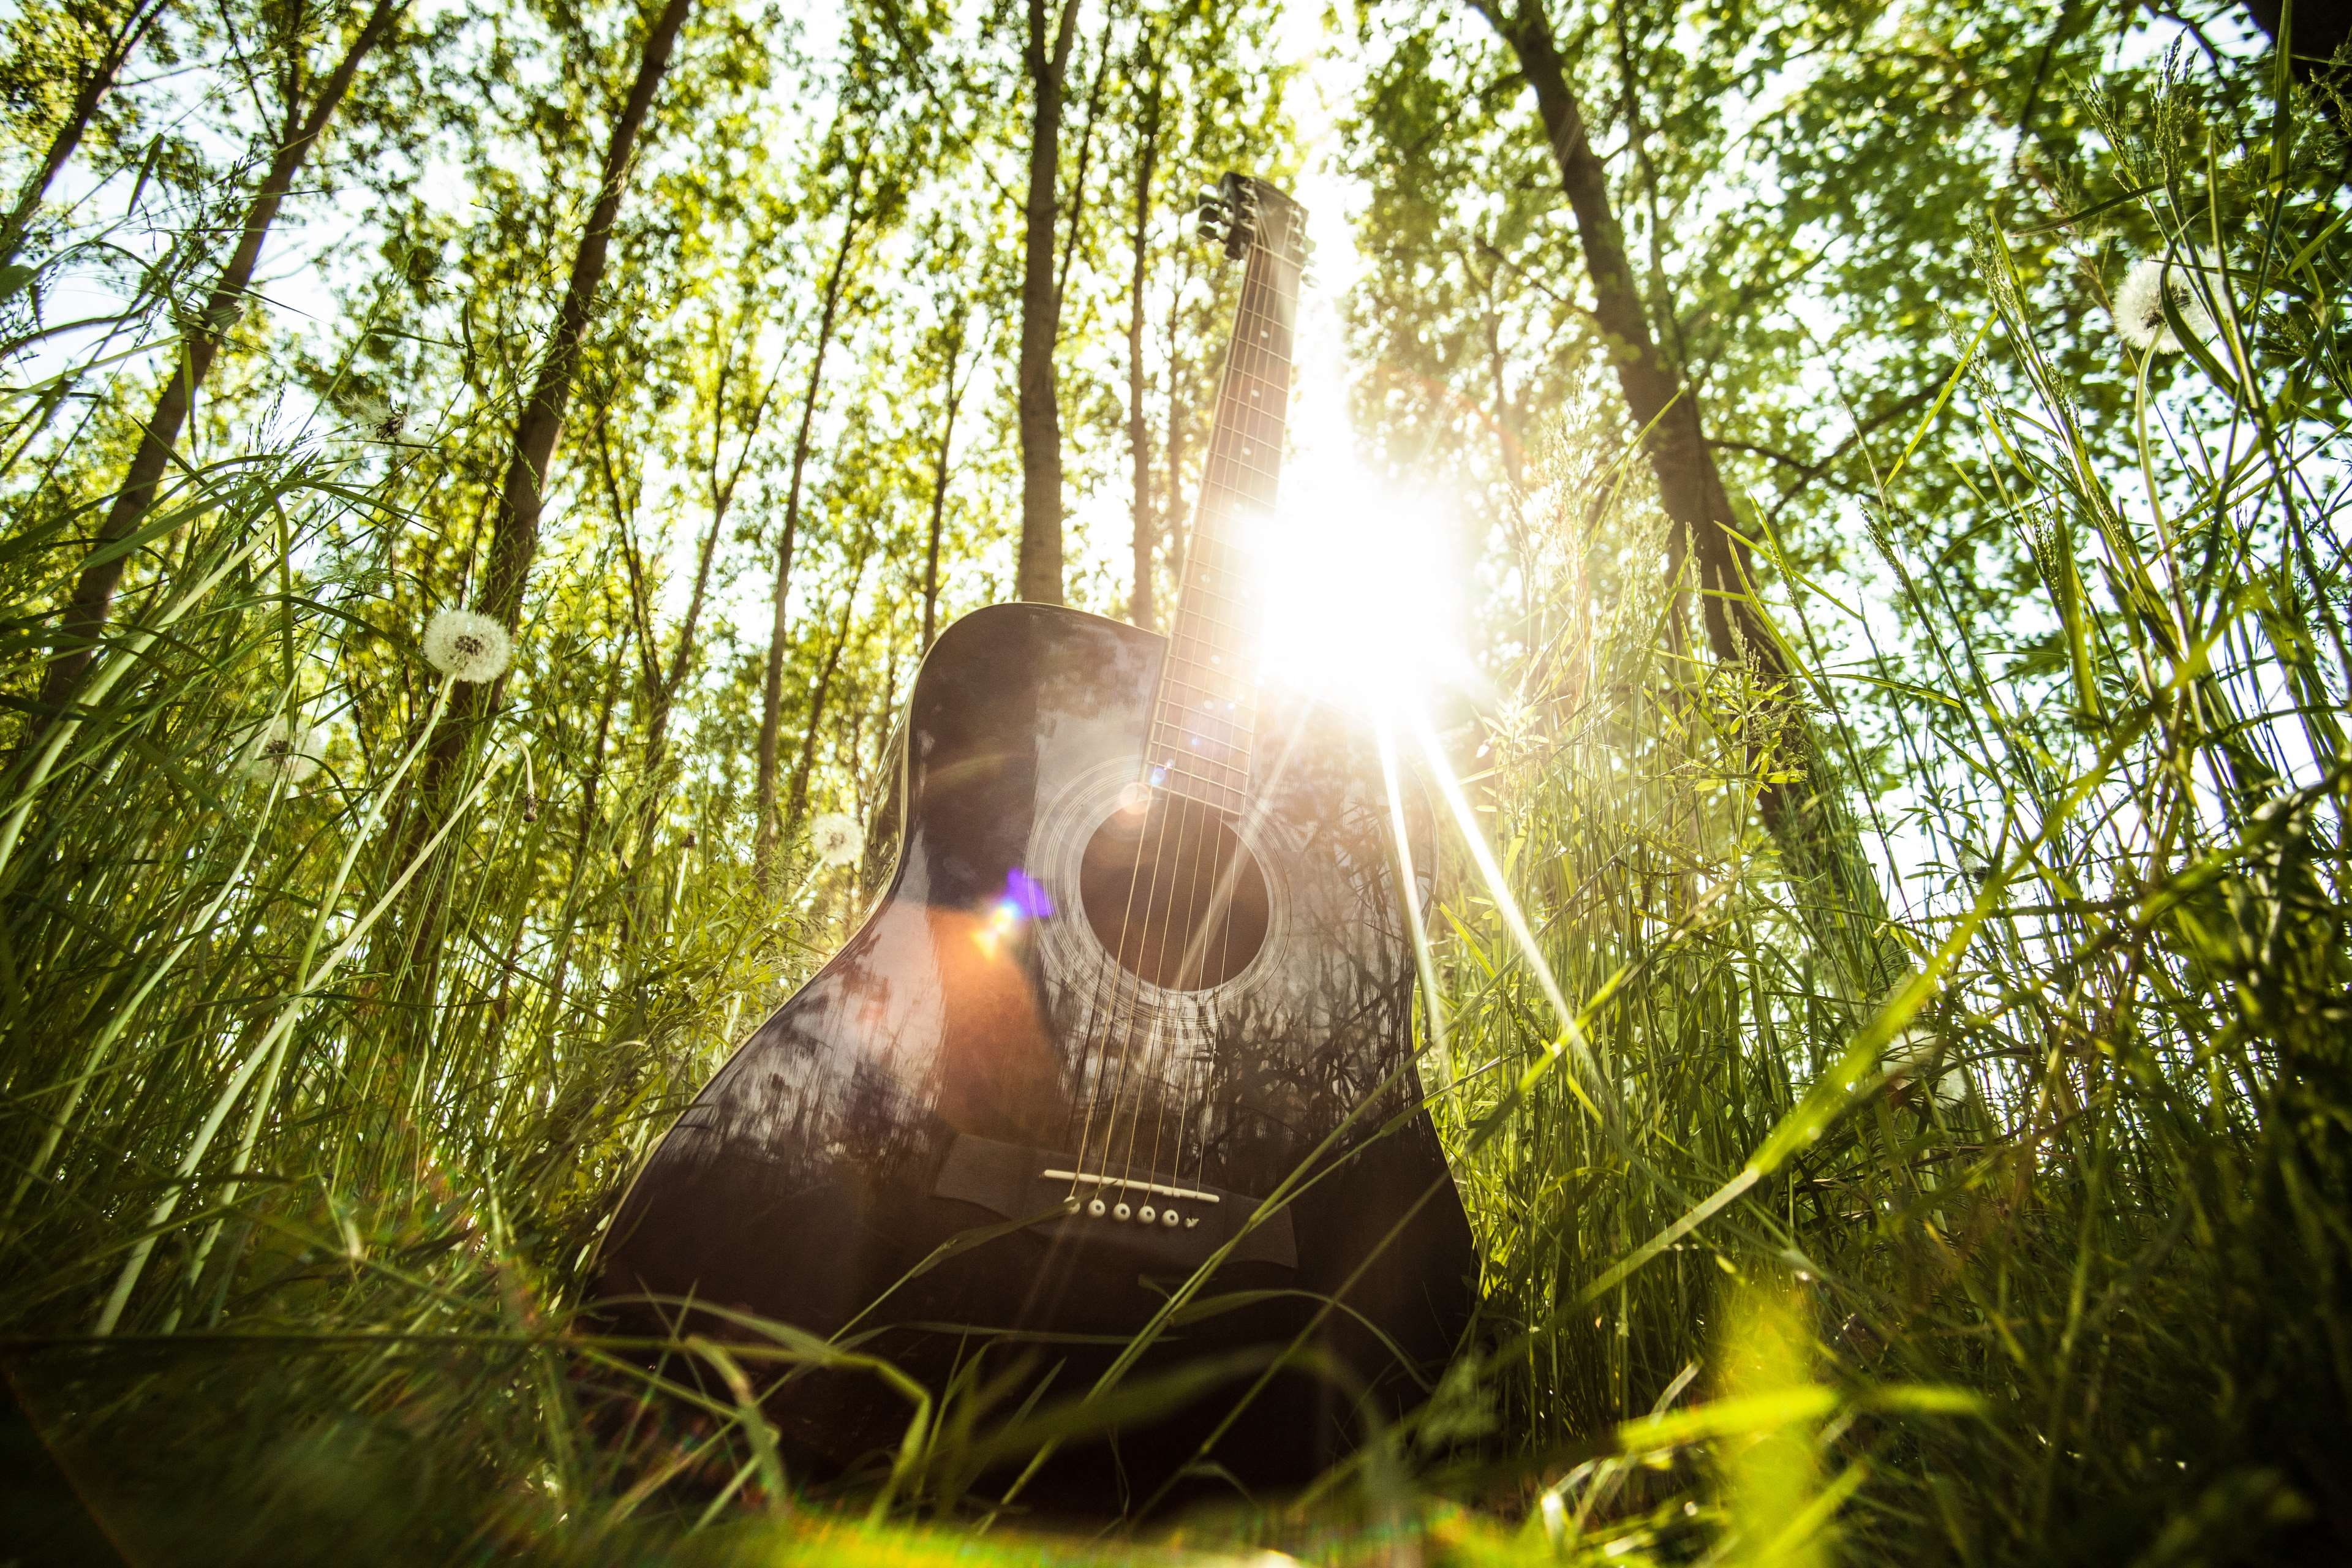 acoustic guitar, chords, grass, music, musical instrument, nature